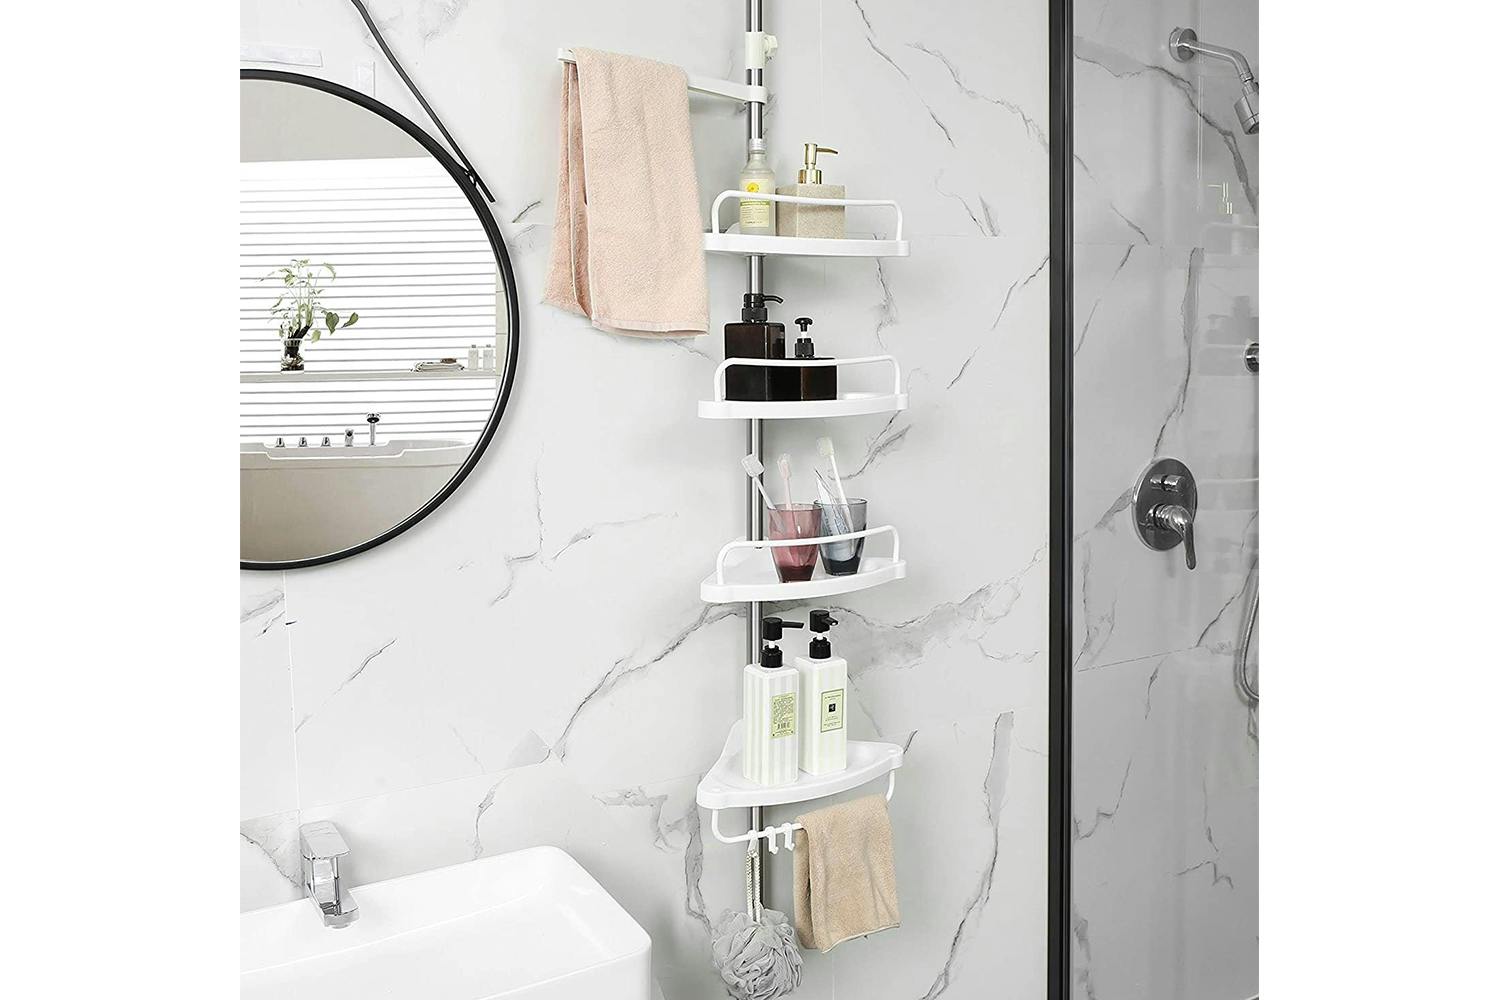 Songmics Tension Corner Shower Caddy | White & Silver